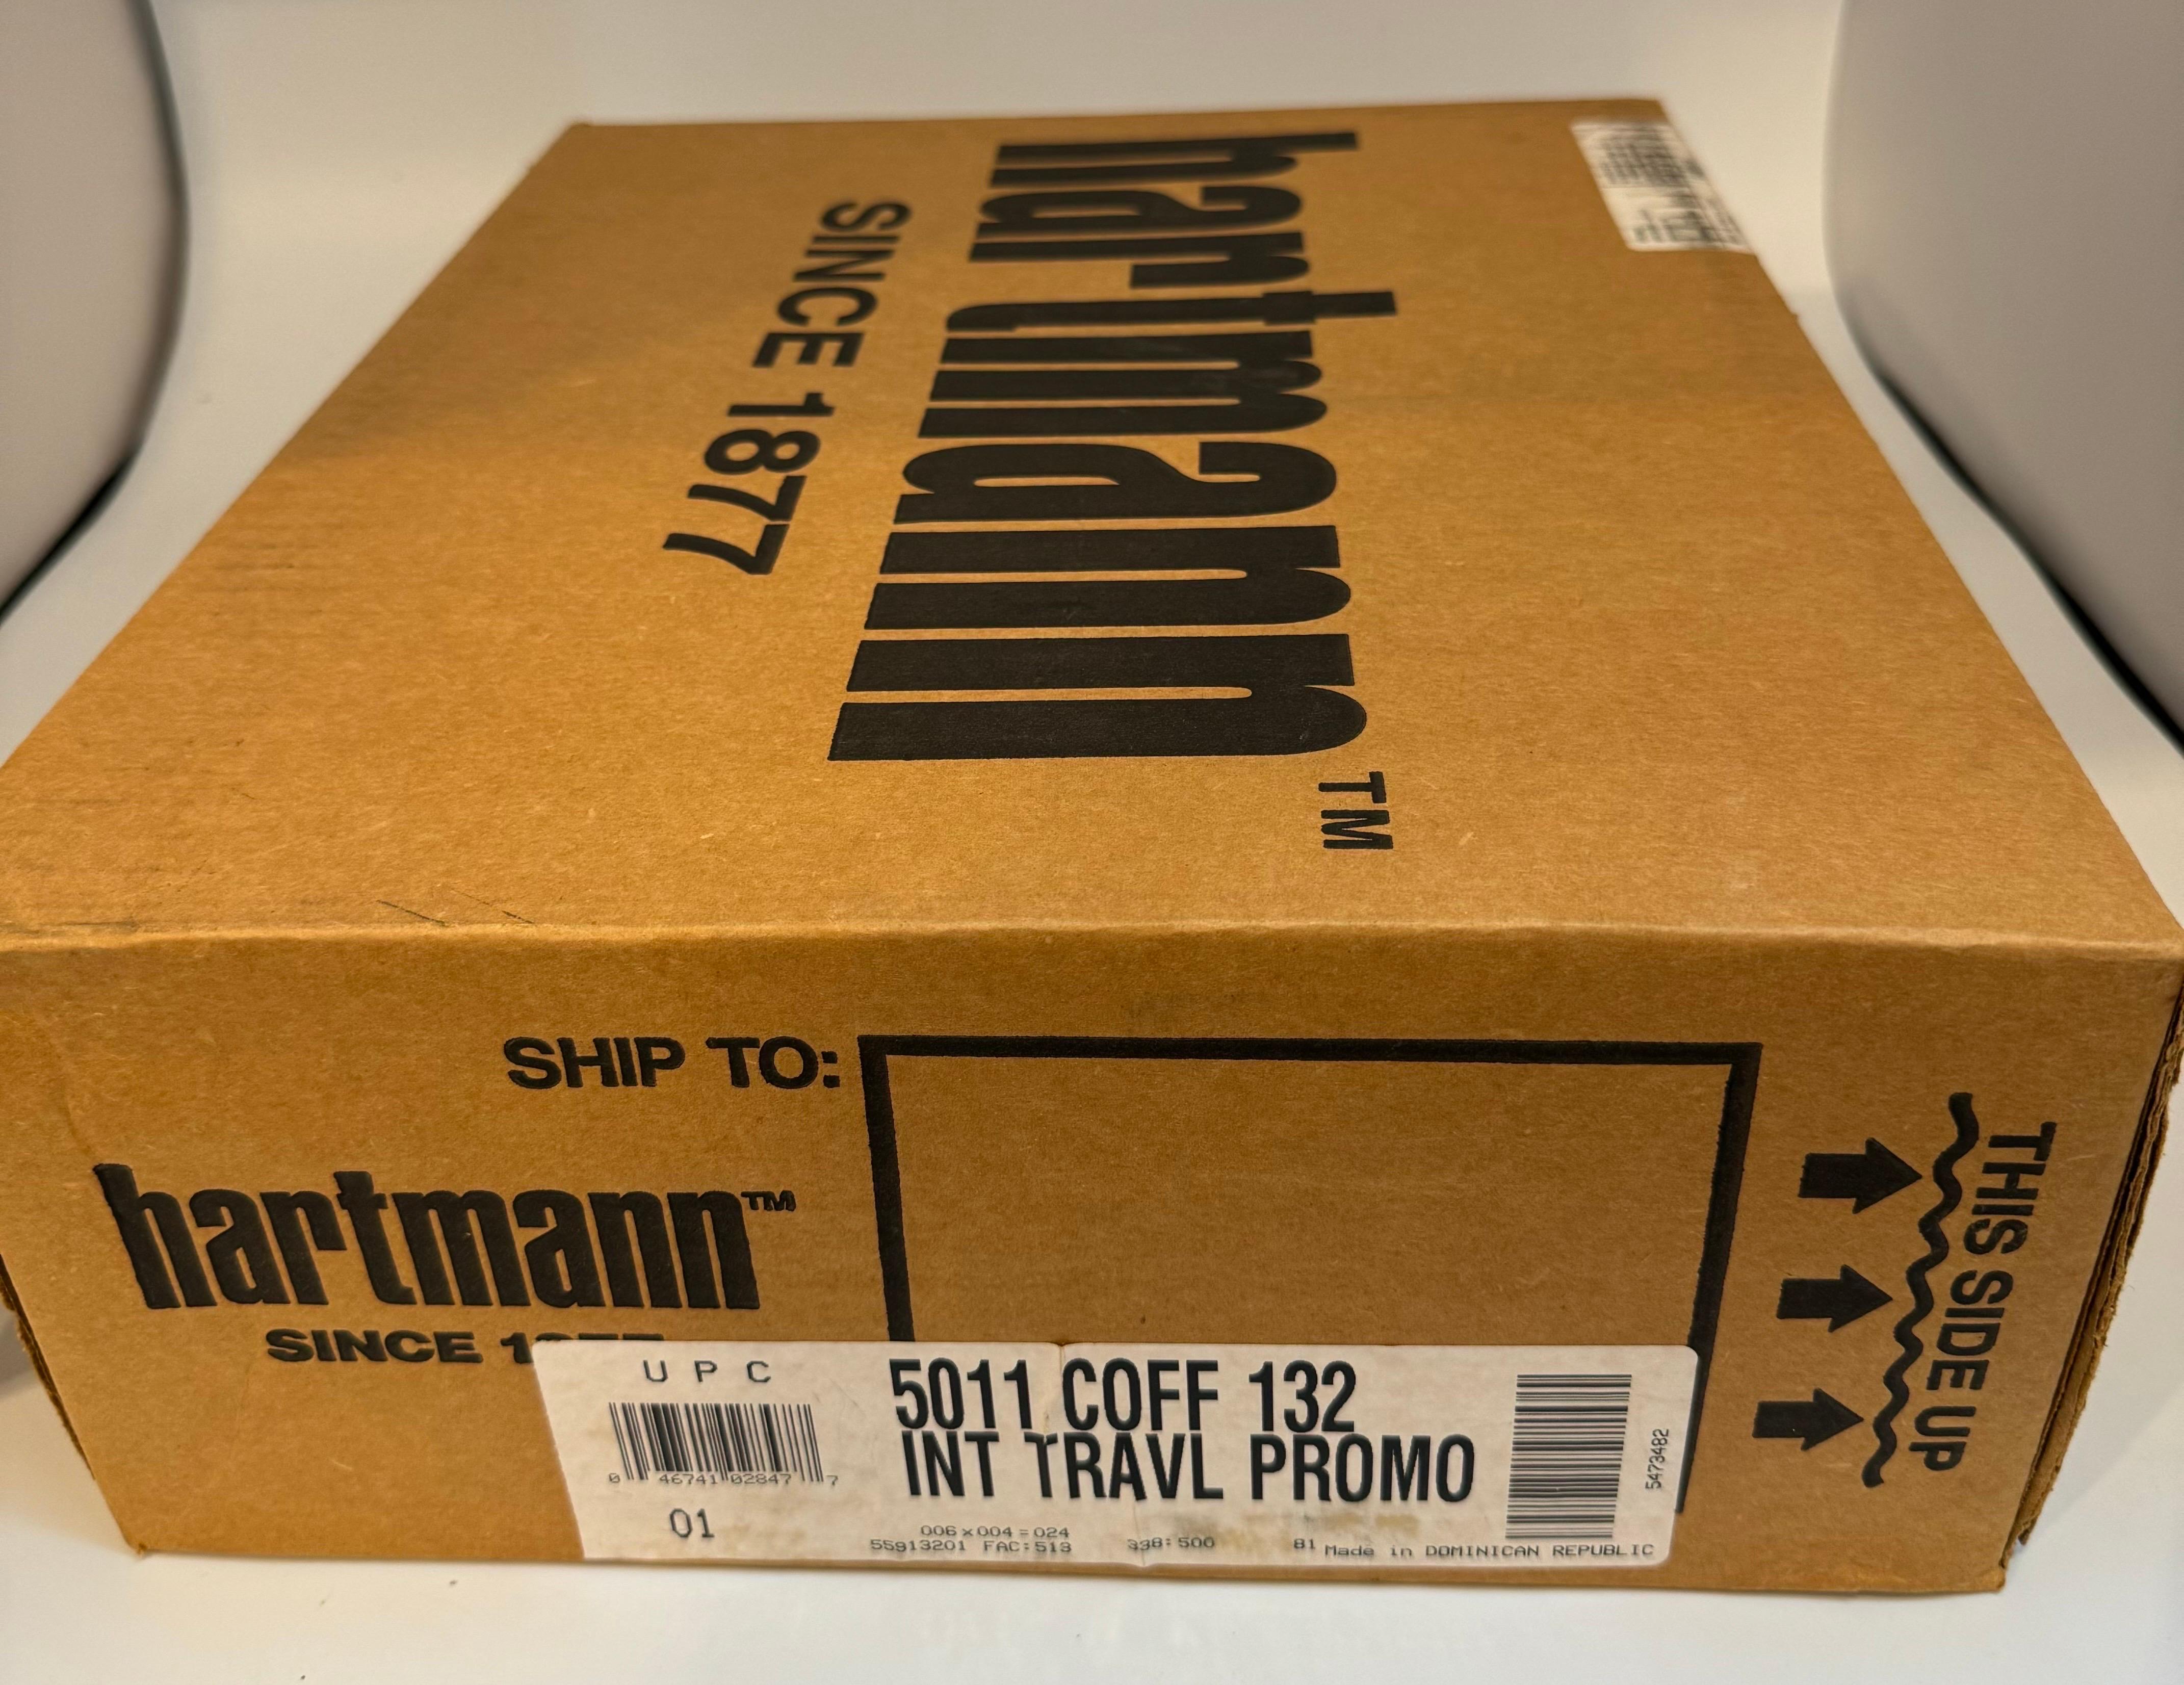 Vintage 48” Hartmann Suitcase / Suiter Garment Bag with Pockets Brand New in a Box
Purchased from Bloomingdale
Hartmann large nylon and Leather fold over garment travel bag New In Box! 
Please look for the matching carry on and other pieces in